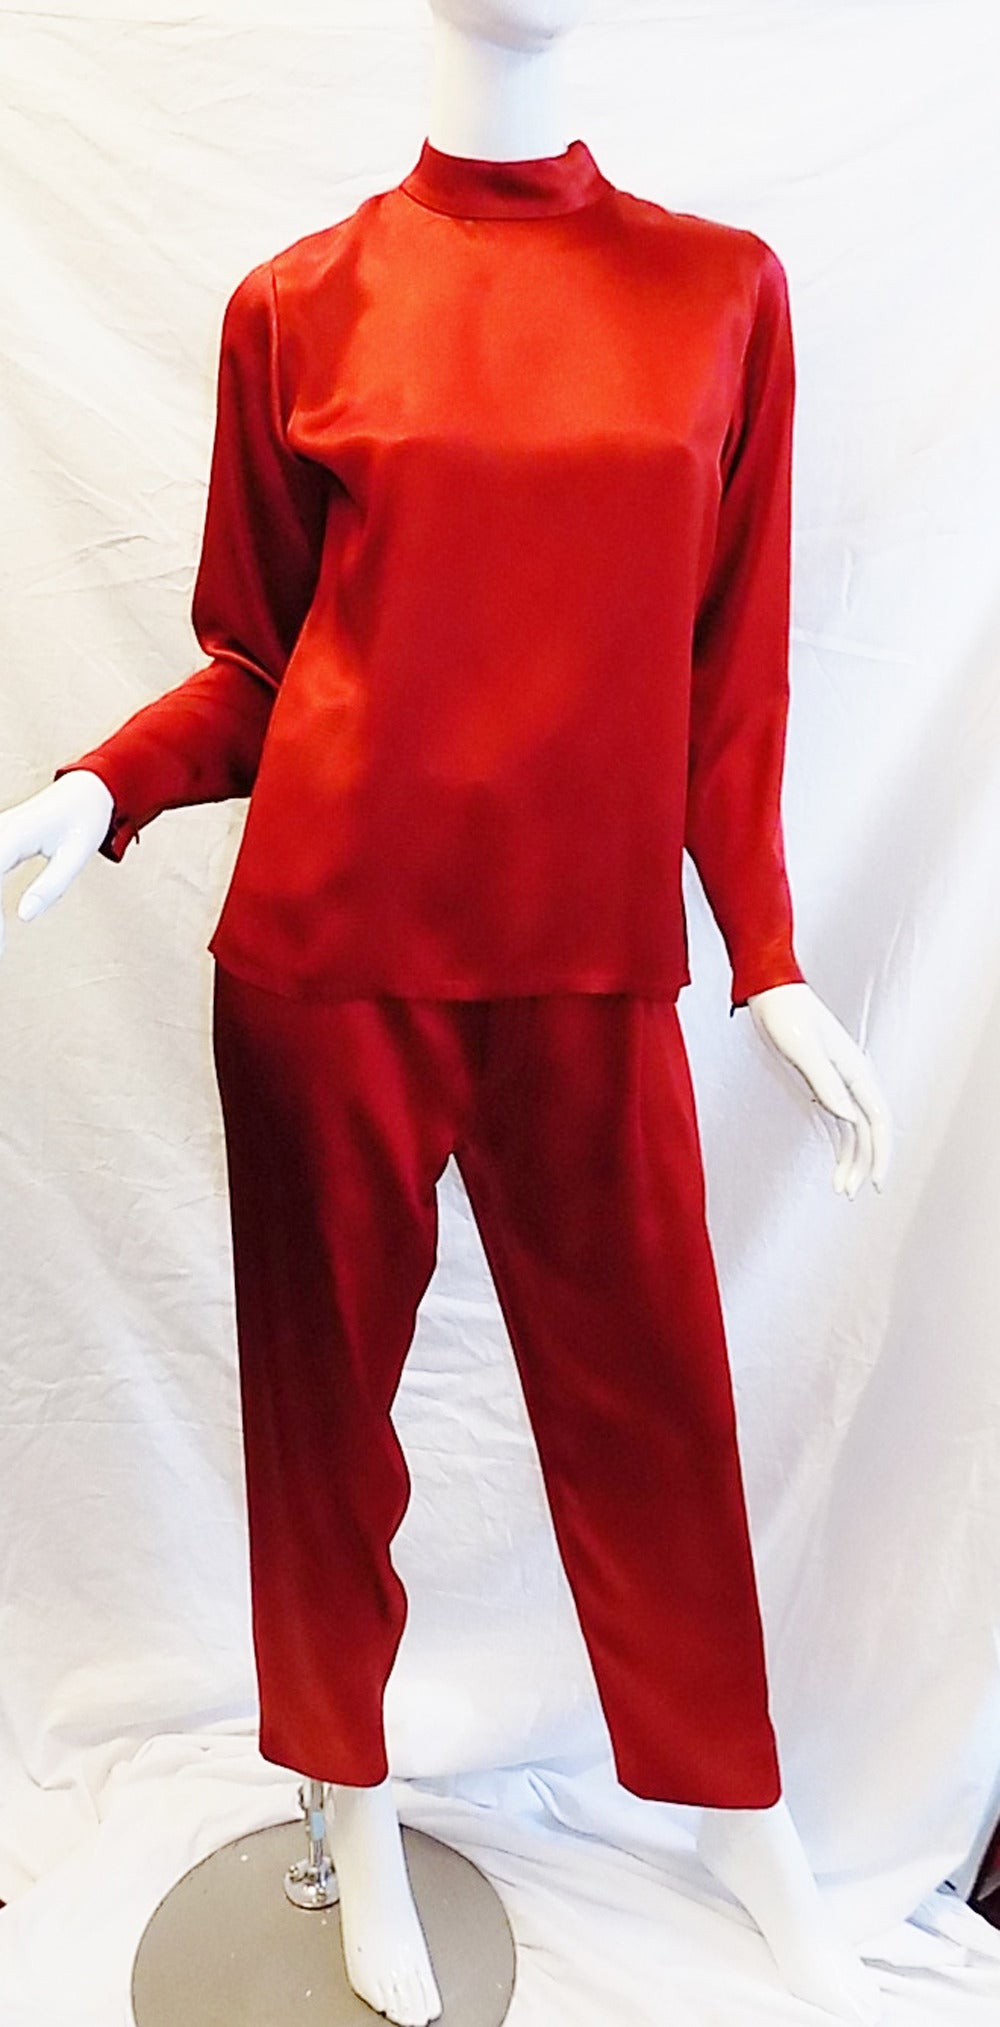 Yves Saint Laurent Red liquid silk Pants and Blouse set ensamble In Excellent Condition In New York, NY